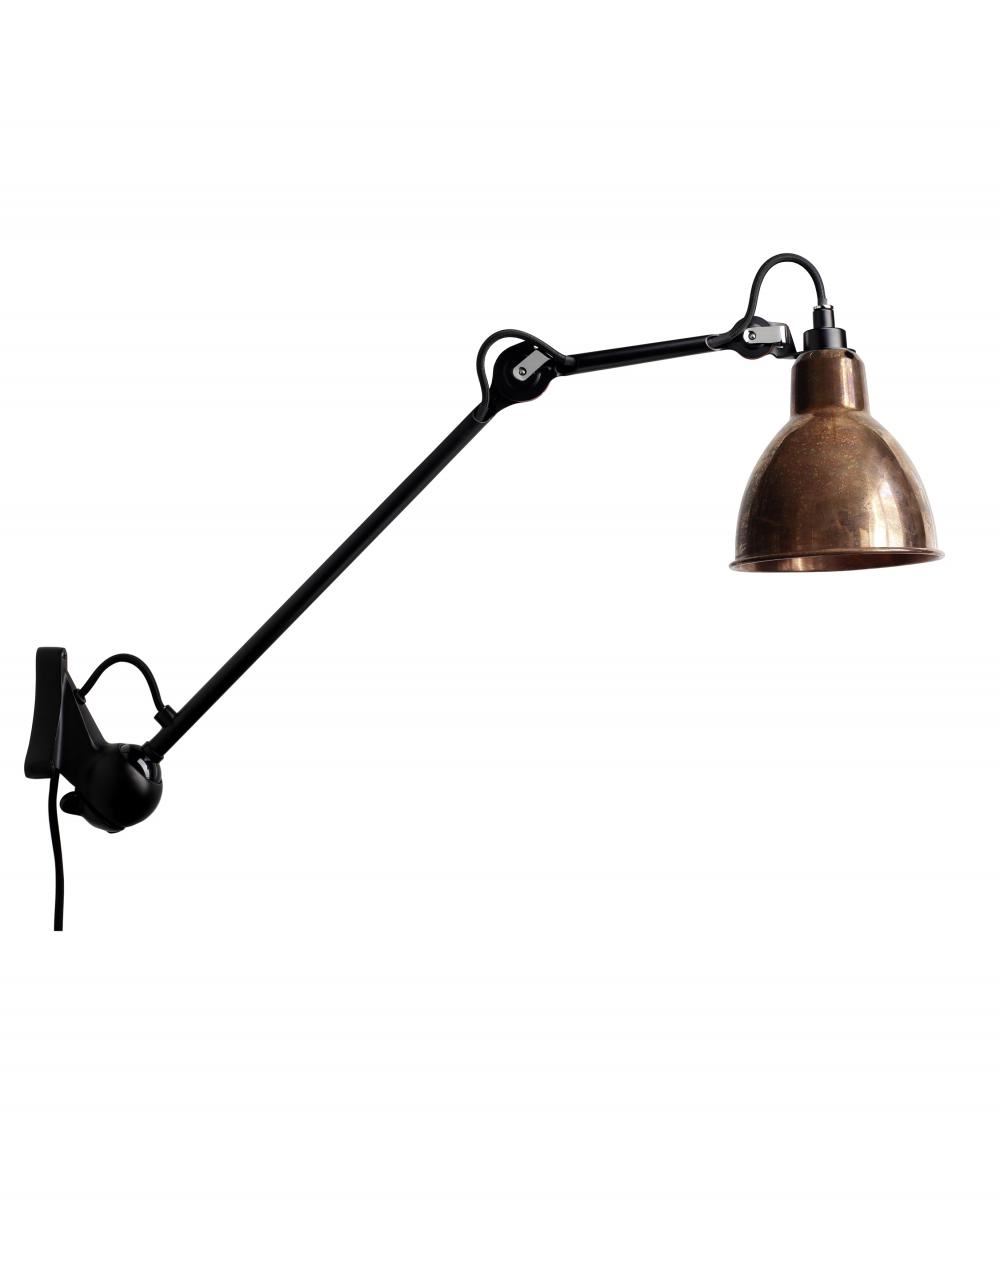 Lampe Gras 222 Wall Light Black Arm Raw Copper Shade With White Interior Round Shade